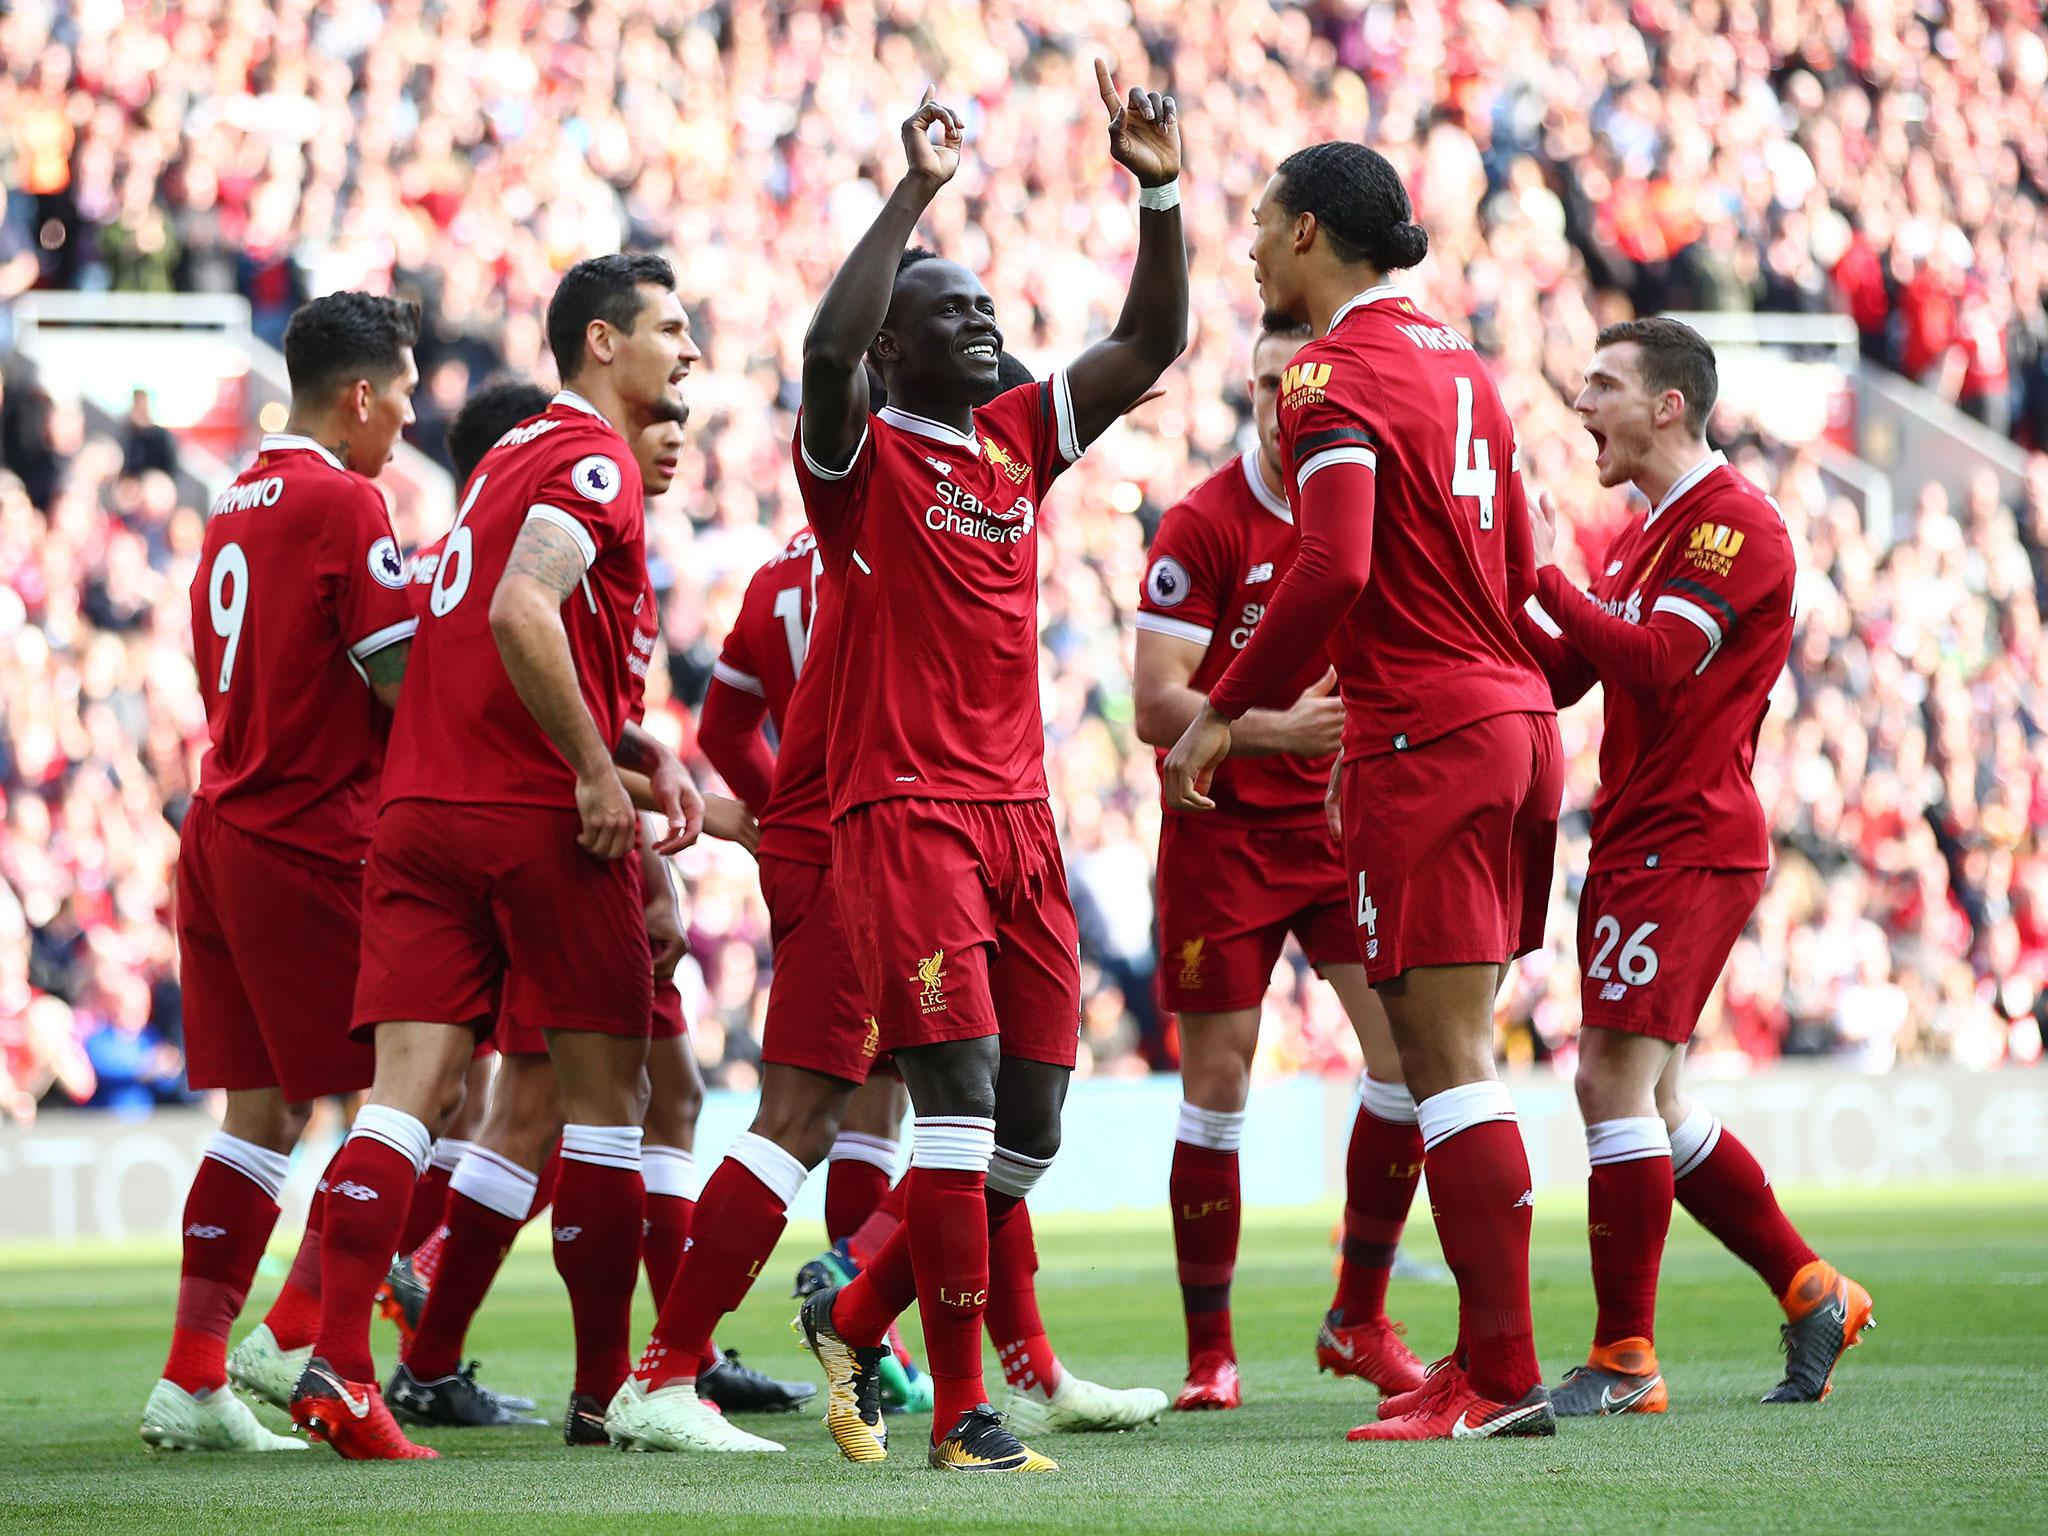 Liverpool won 4-0 in their last encounter with Bournemouth